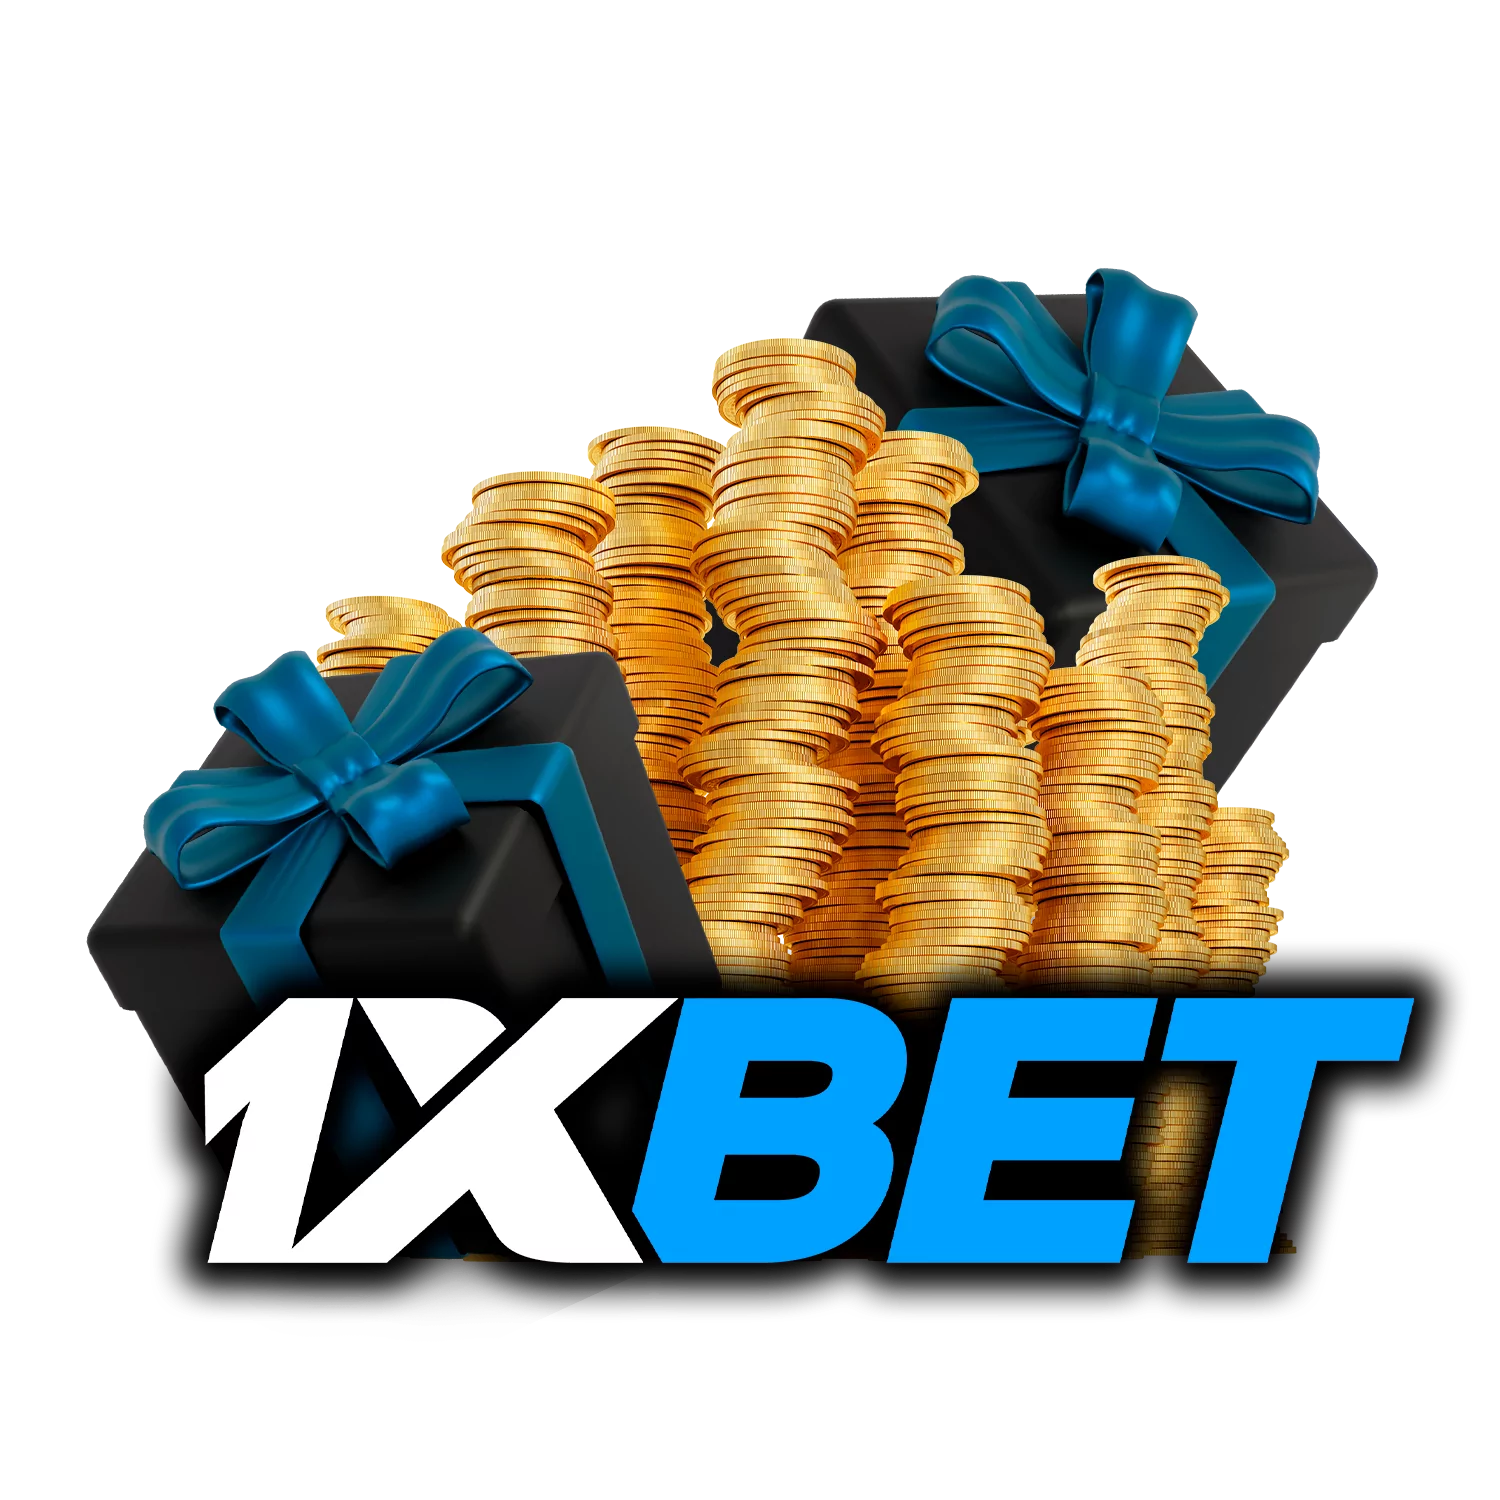 In this article, we share tips on how to receive the welcome bonus from 1xBet and give you a special promo code on you to get even more benefits.